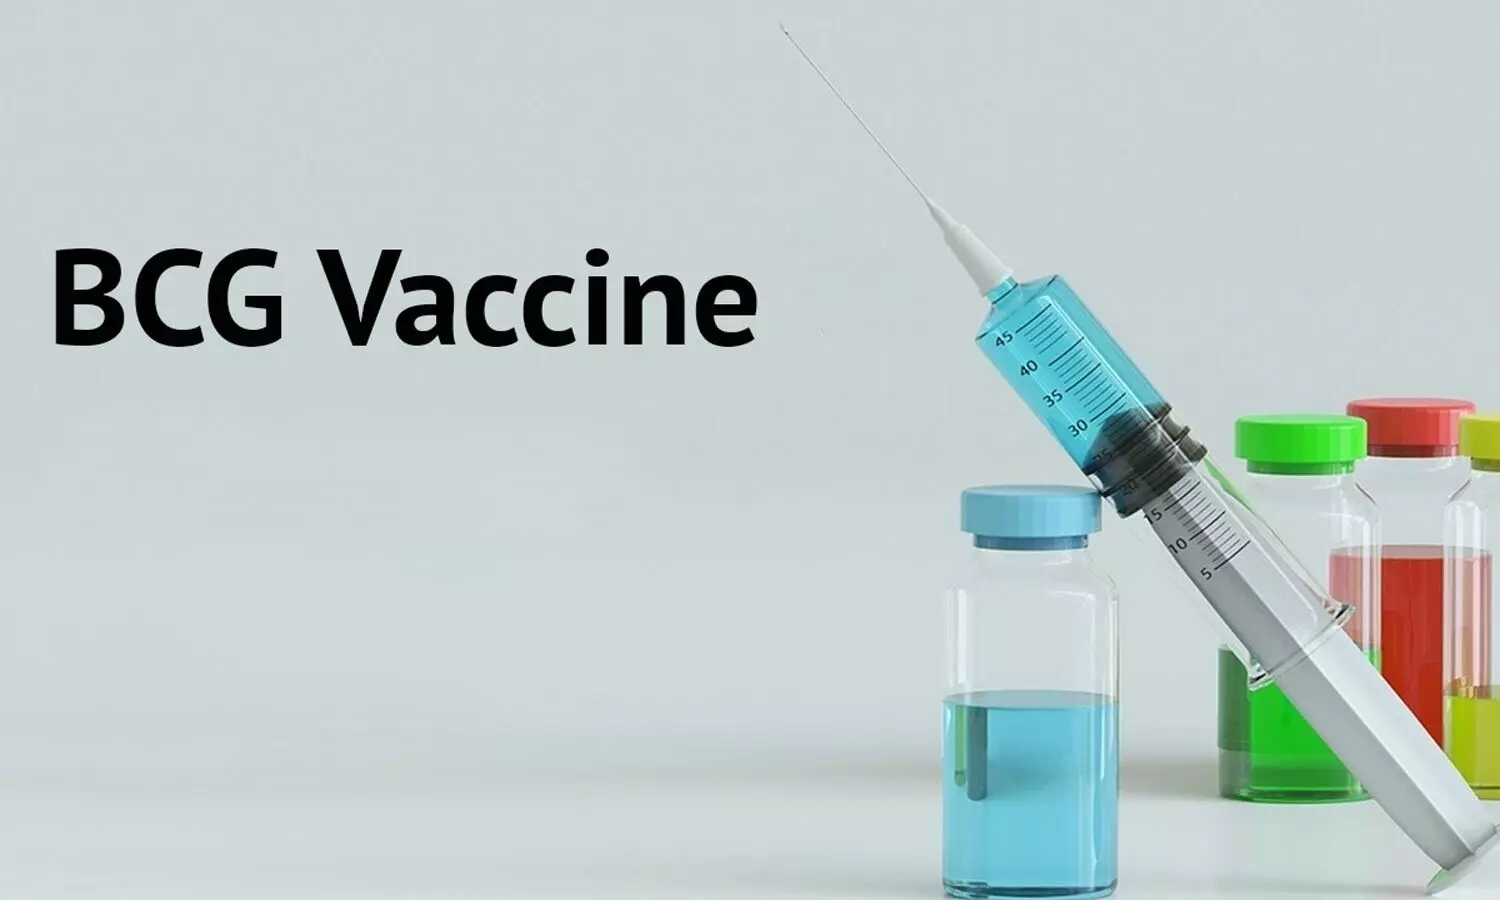 No evidence suggests BCG vaccine can protect against COVID-19: WHO